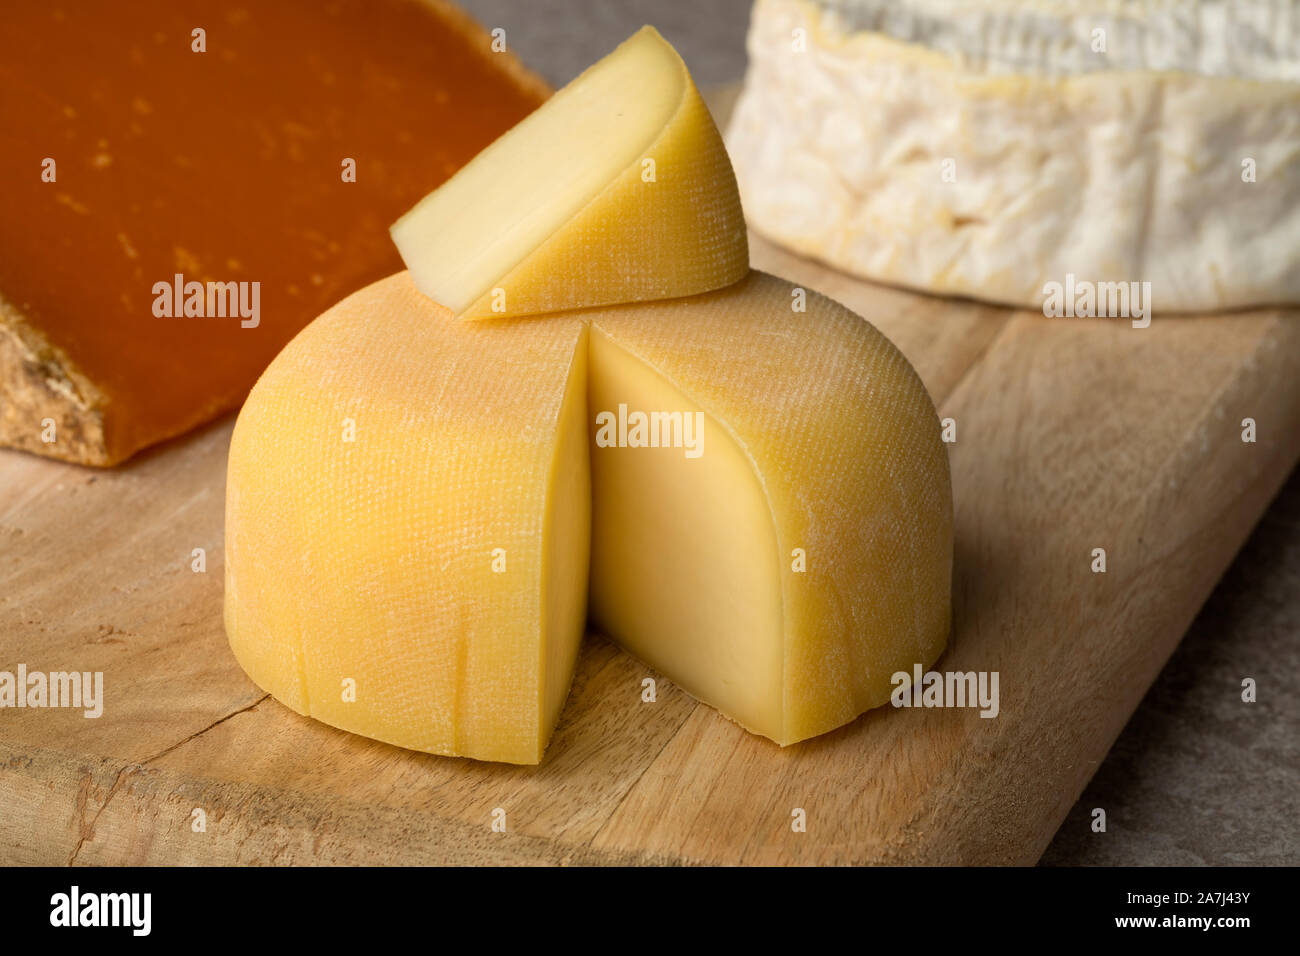 Diversity of traditional French cheese like Camembert, Mimolette on a cutting board and Le Mouillotin close up Stock Photo